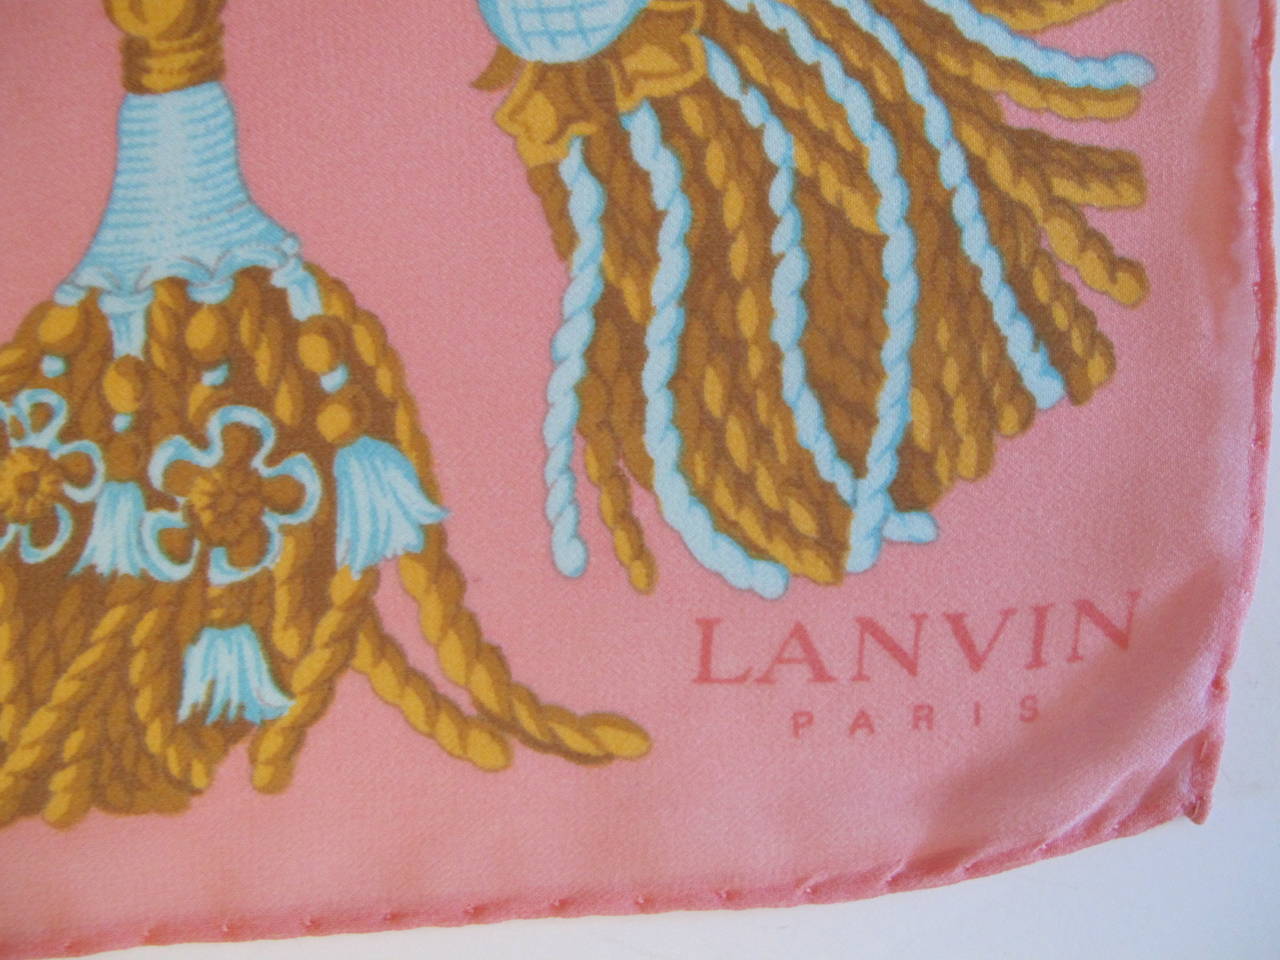 1960's Vintage Lanvin Scarf with Designs of original Lanvin Perfume Bottle with tassels. Important Provenance  (Please telephone us for more information). Hand-Rolled hem. Colors: Cognac, bubble gum pink, sky blue, silver grey.